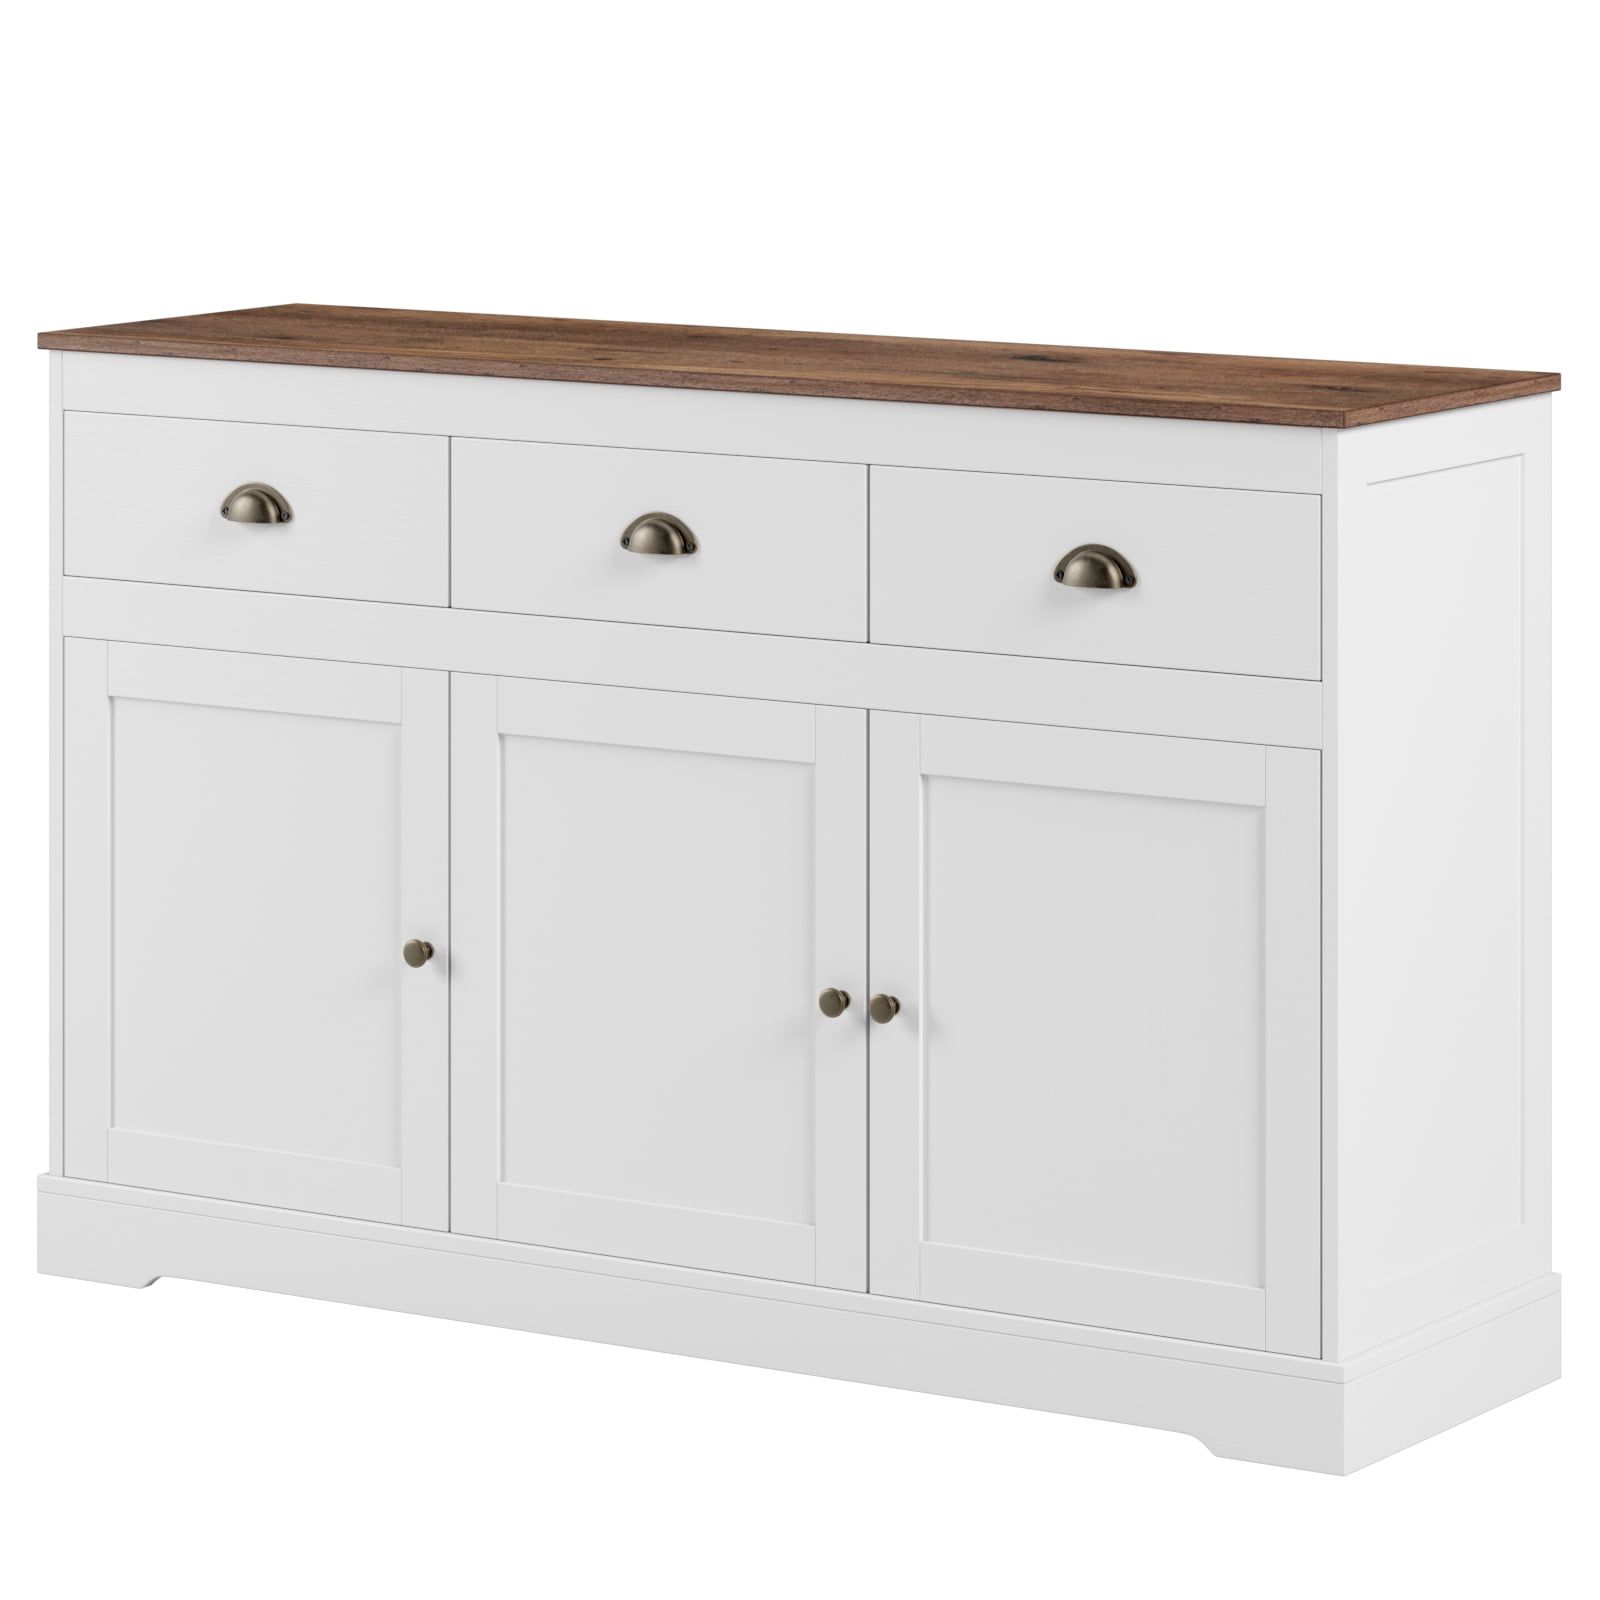 Homfa Sideboard Storage Cabinet With 3 Drawers & 3 Doors, 53.54'' Wide Buffet  Cabinet For Dining Room, White – Walmart For Sideboard Storage Cabinet With 3 Drawers & 3 Doors (Gallery 2 of 20)